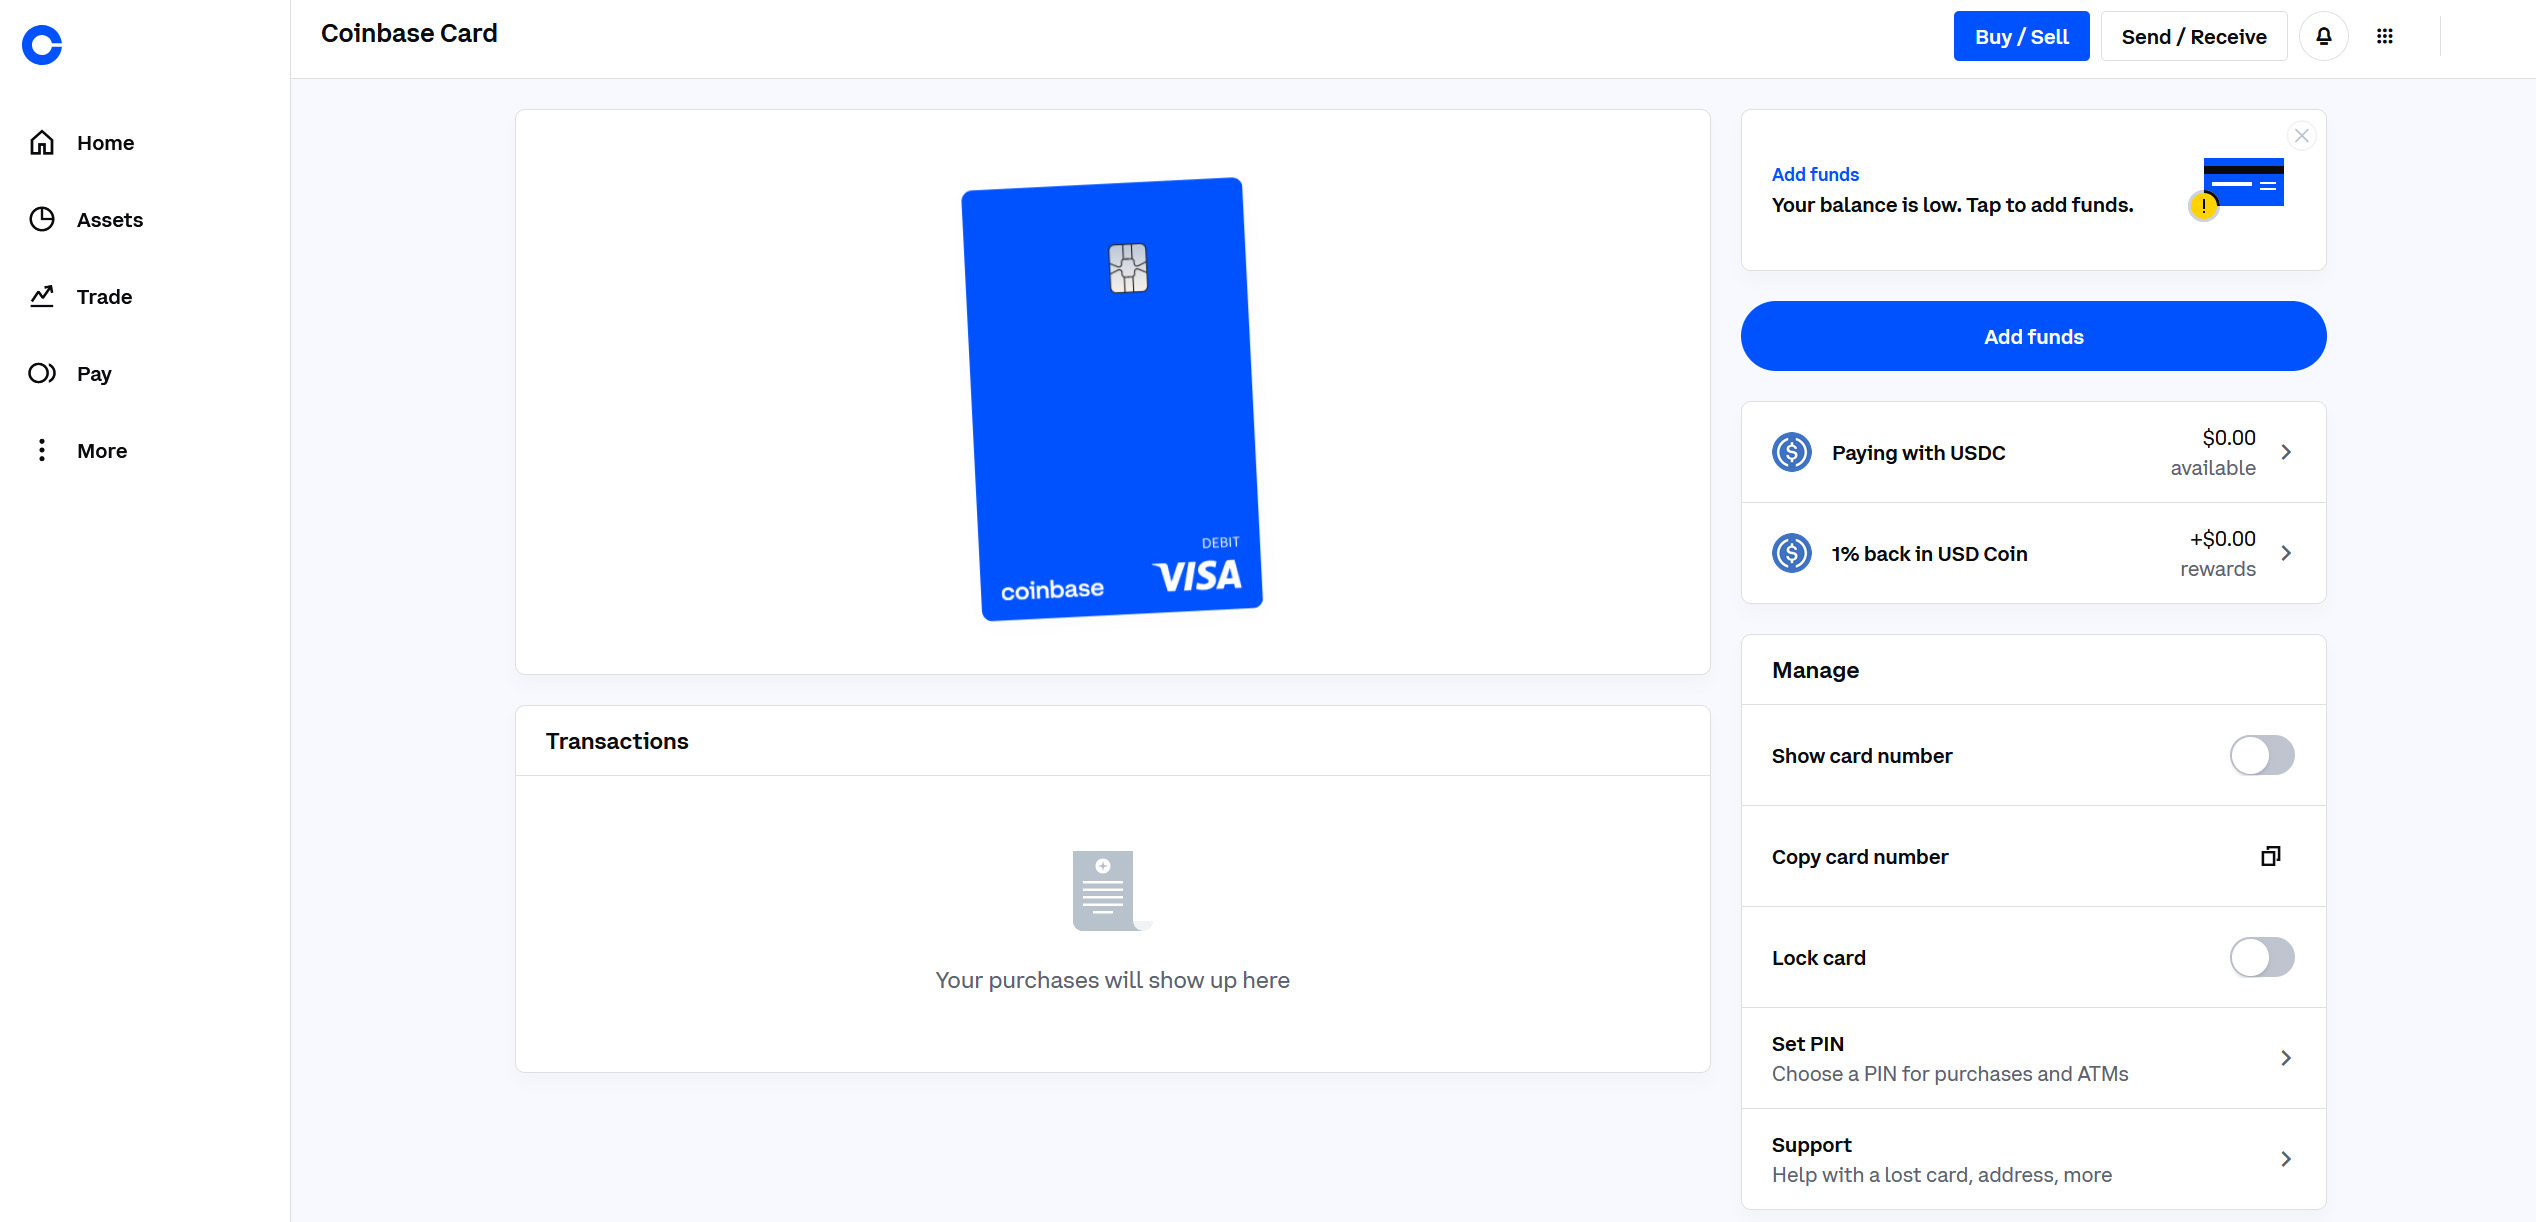 Coinbase Card Overview